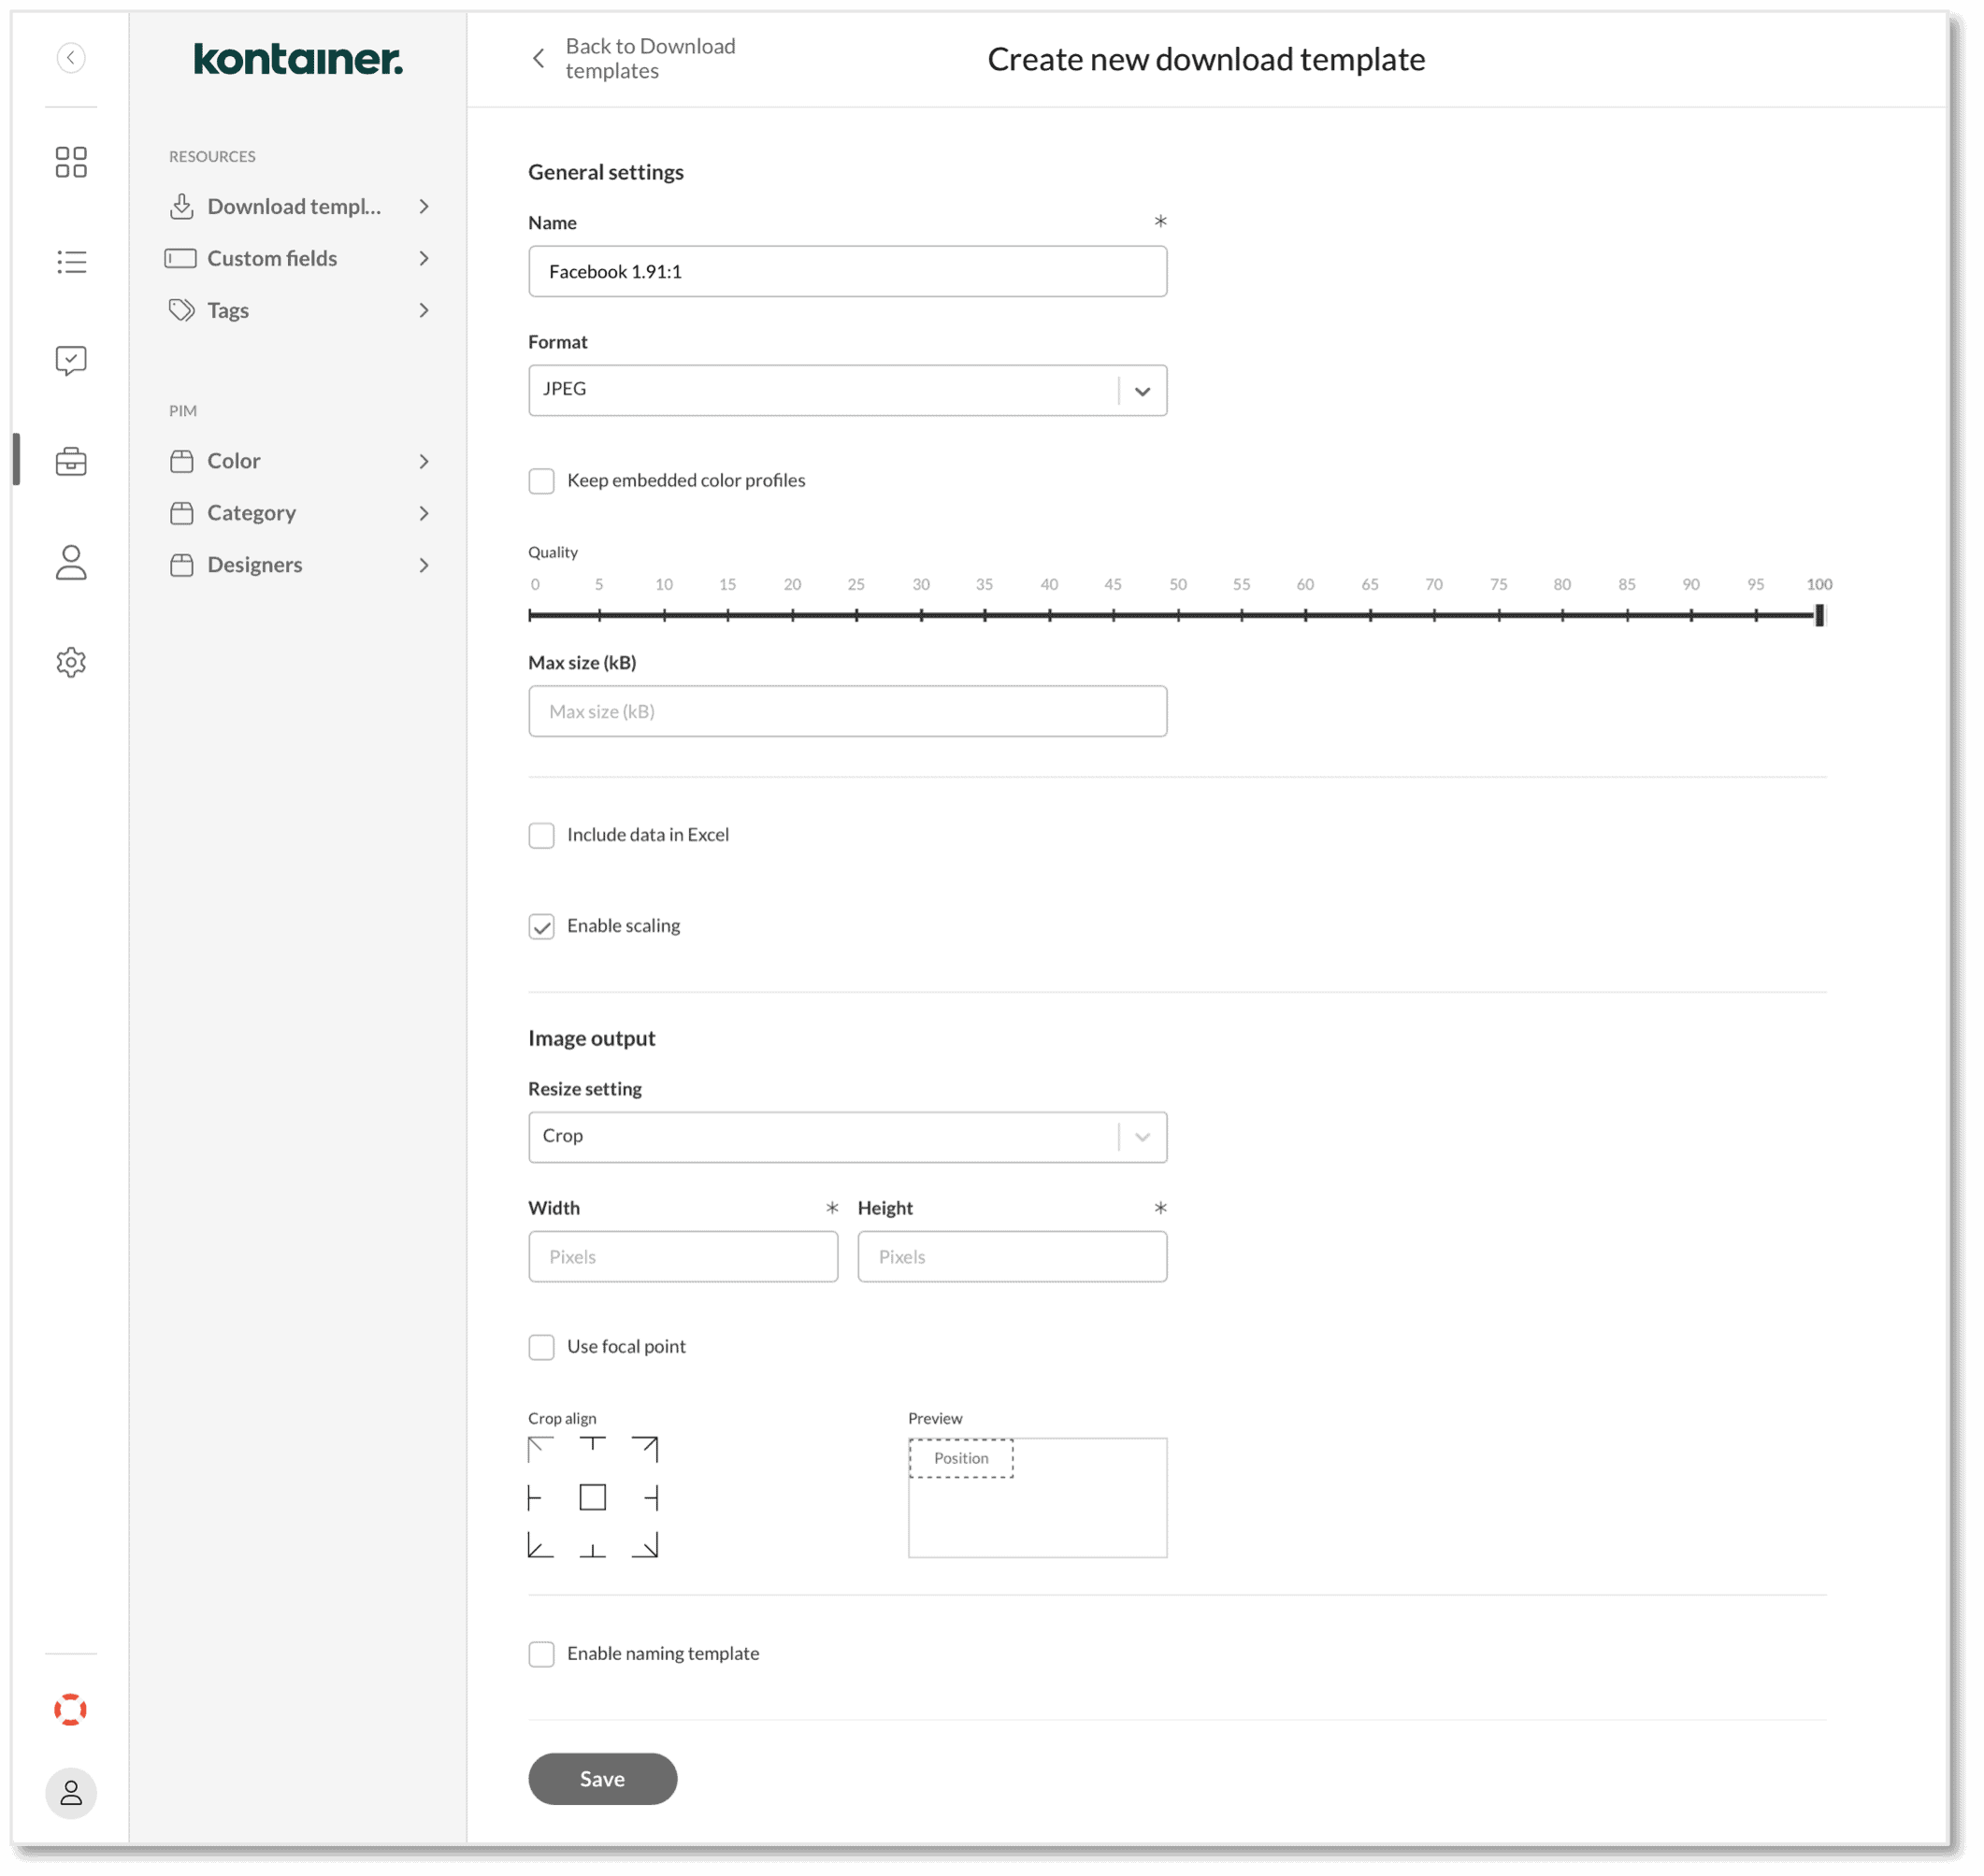 Create New Download Template Form in Kontainer